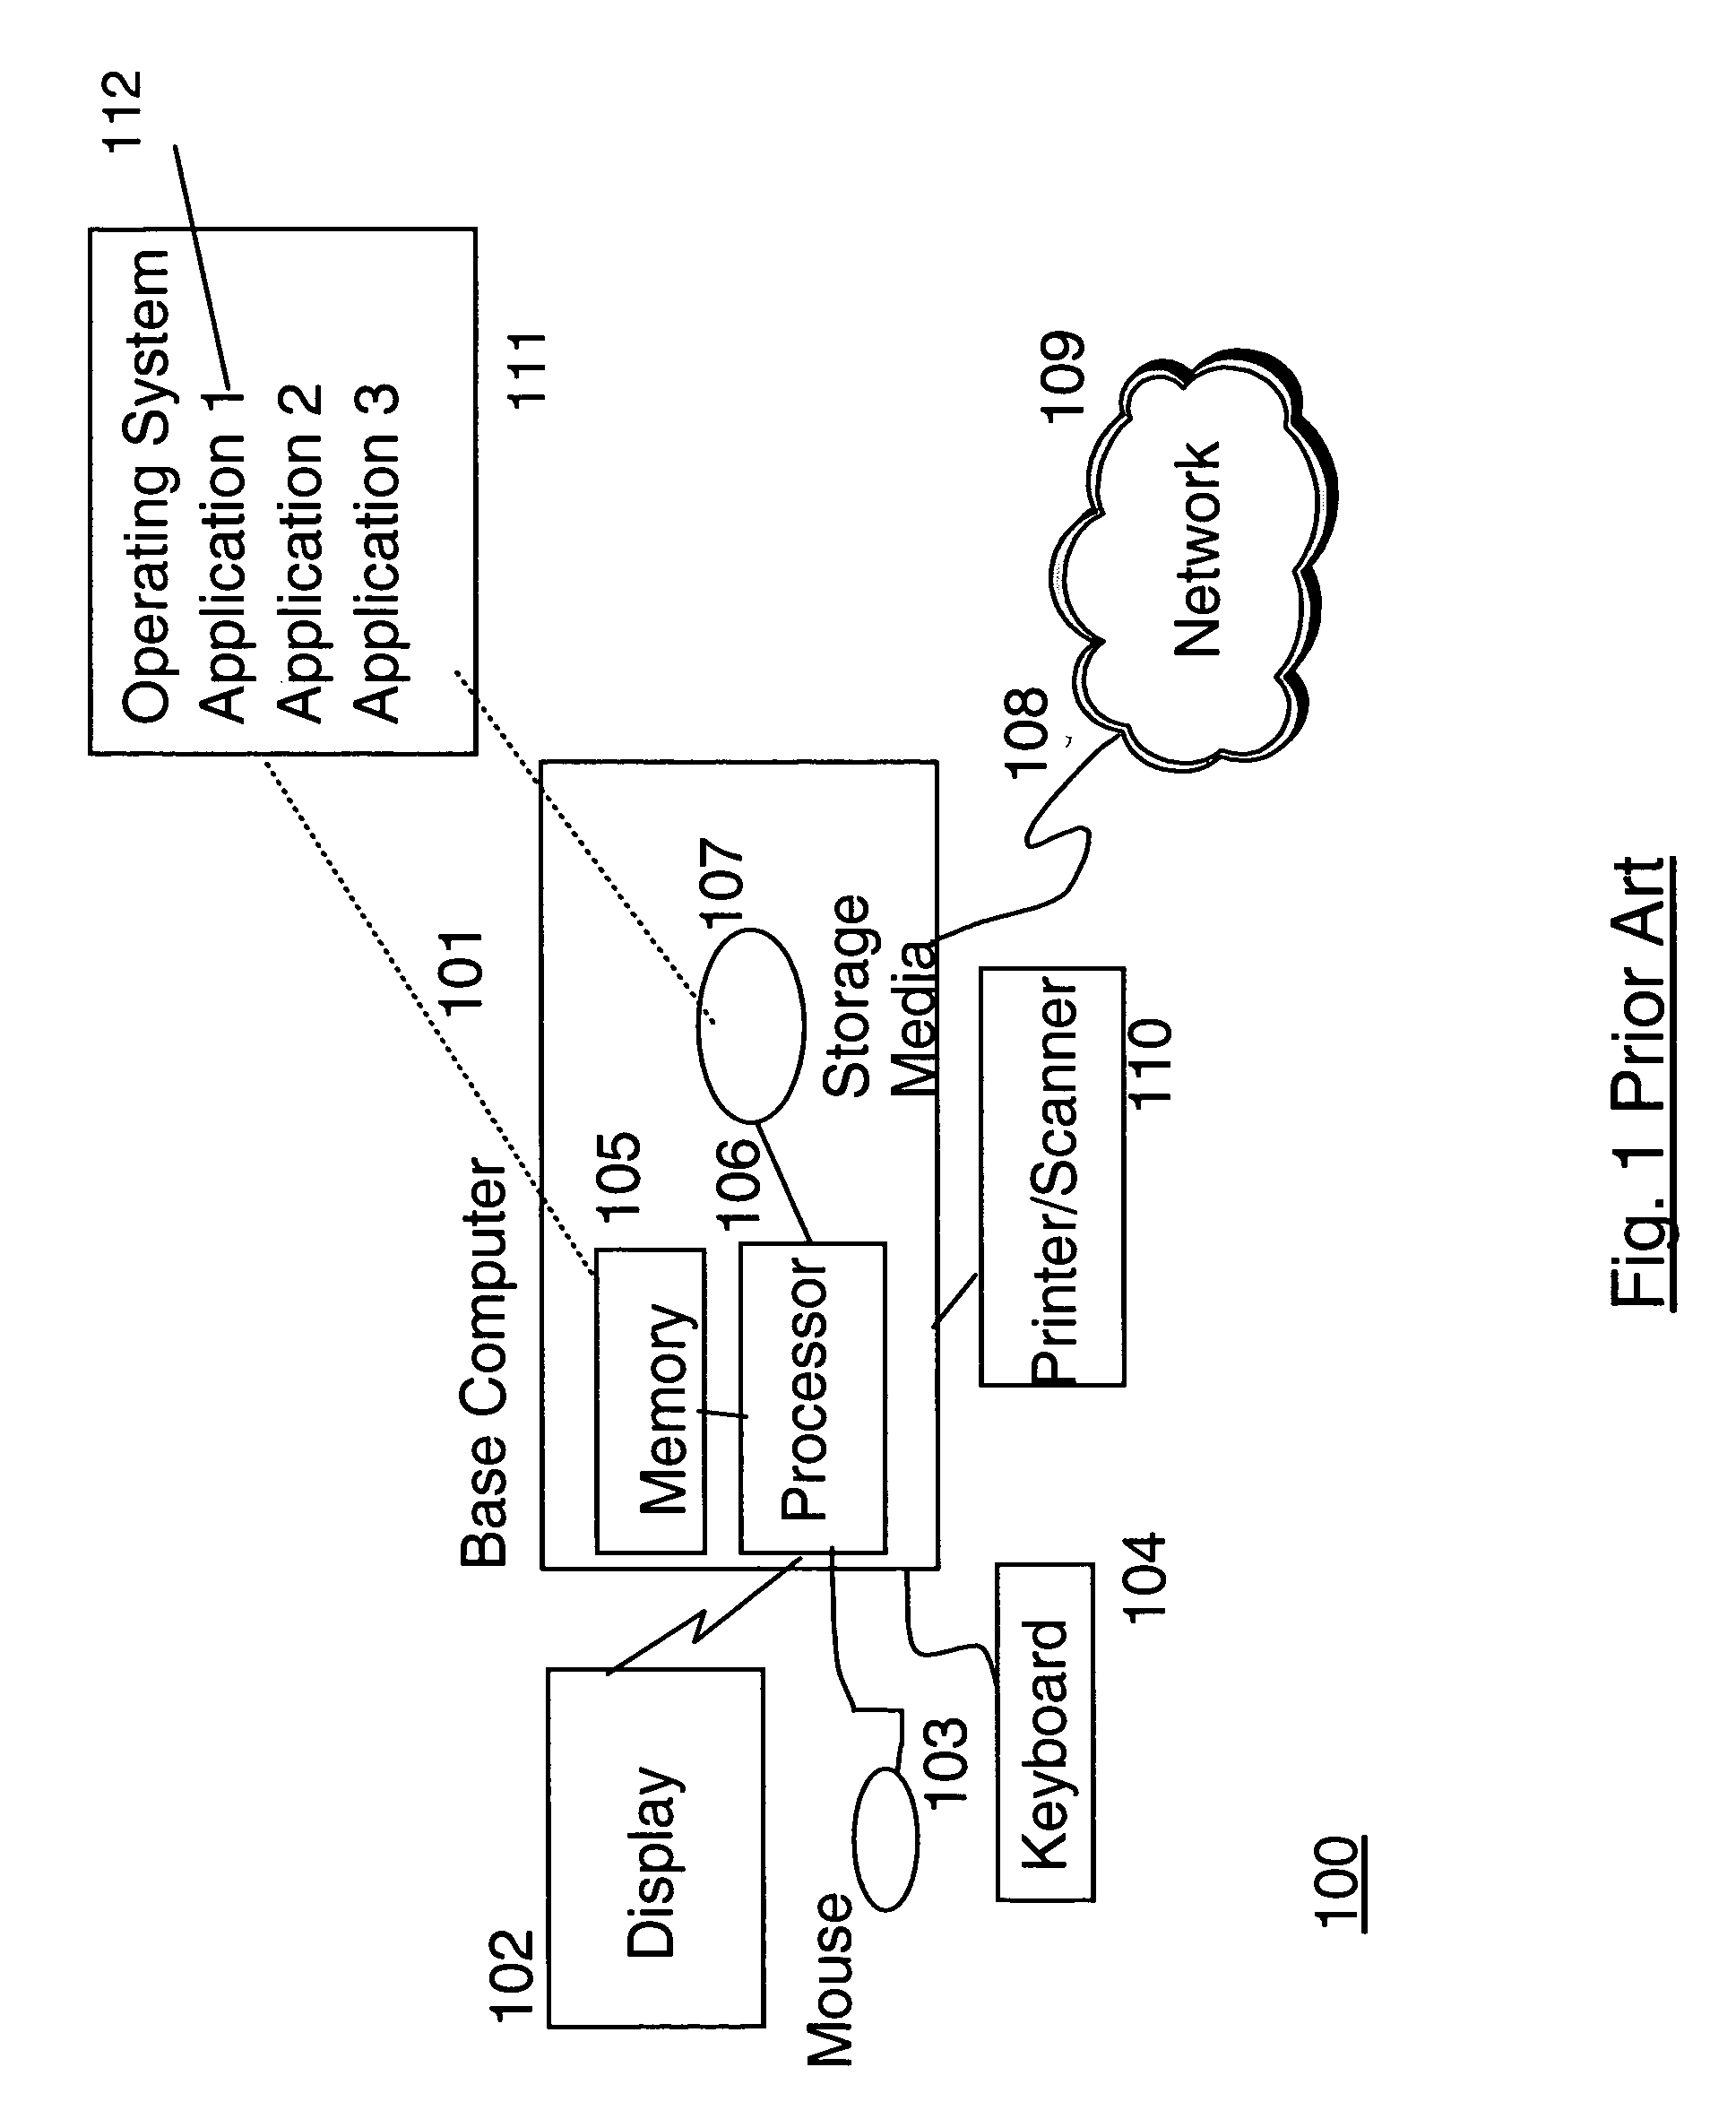 Real-time voting based authorization in an autonomic workflow process using an electronic messaging system